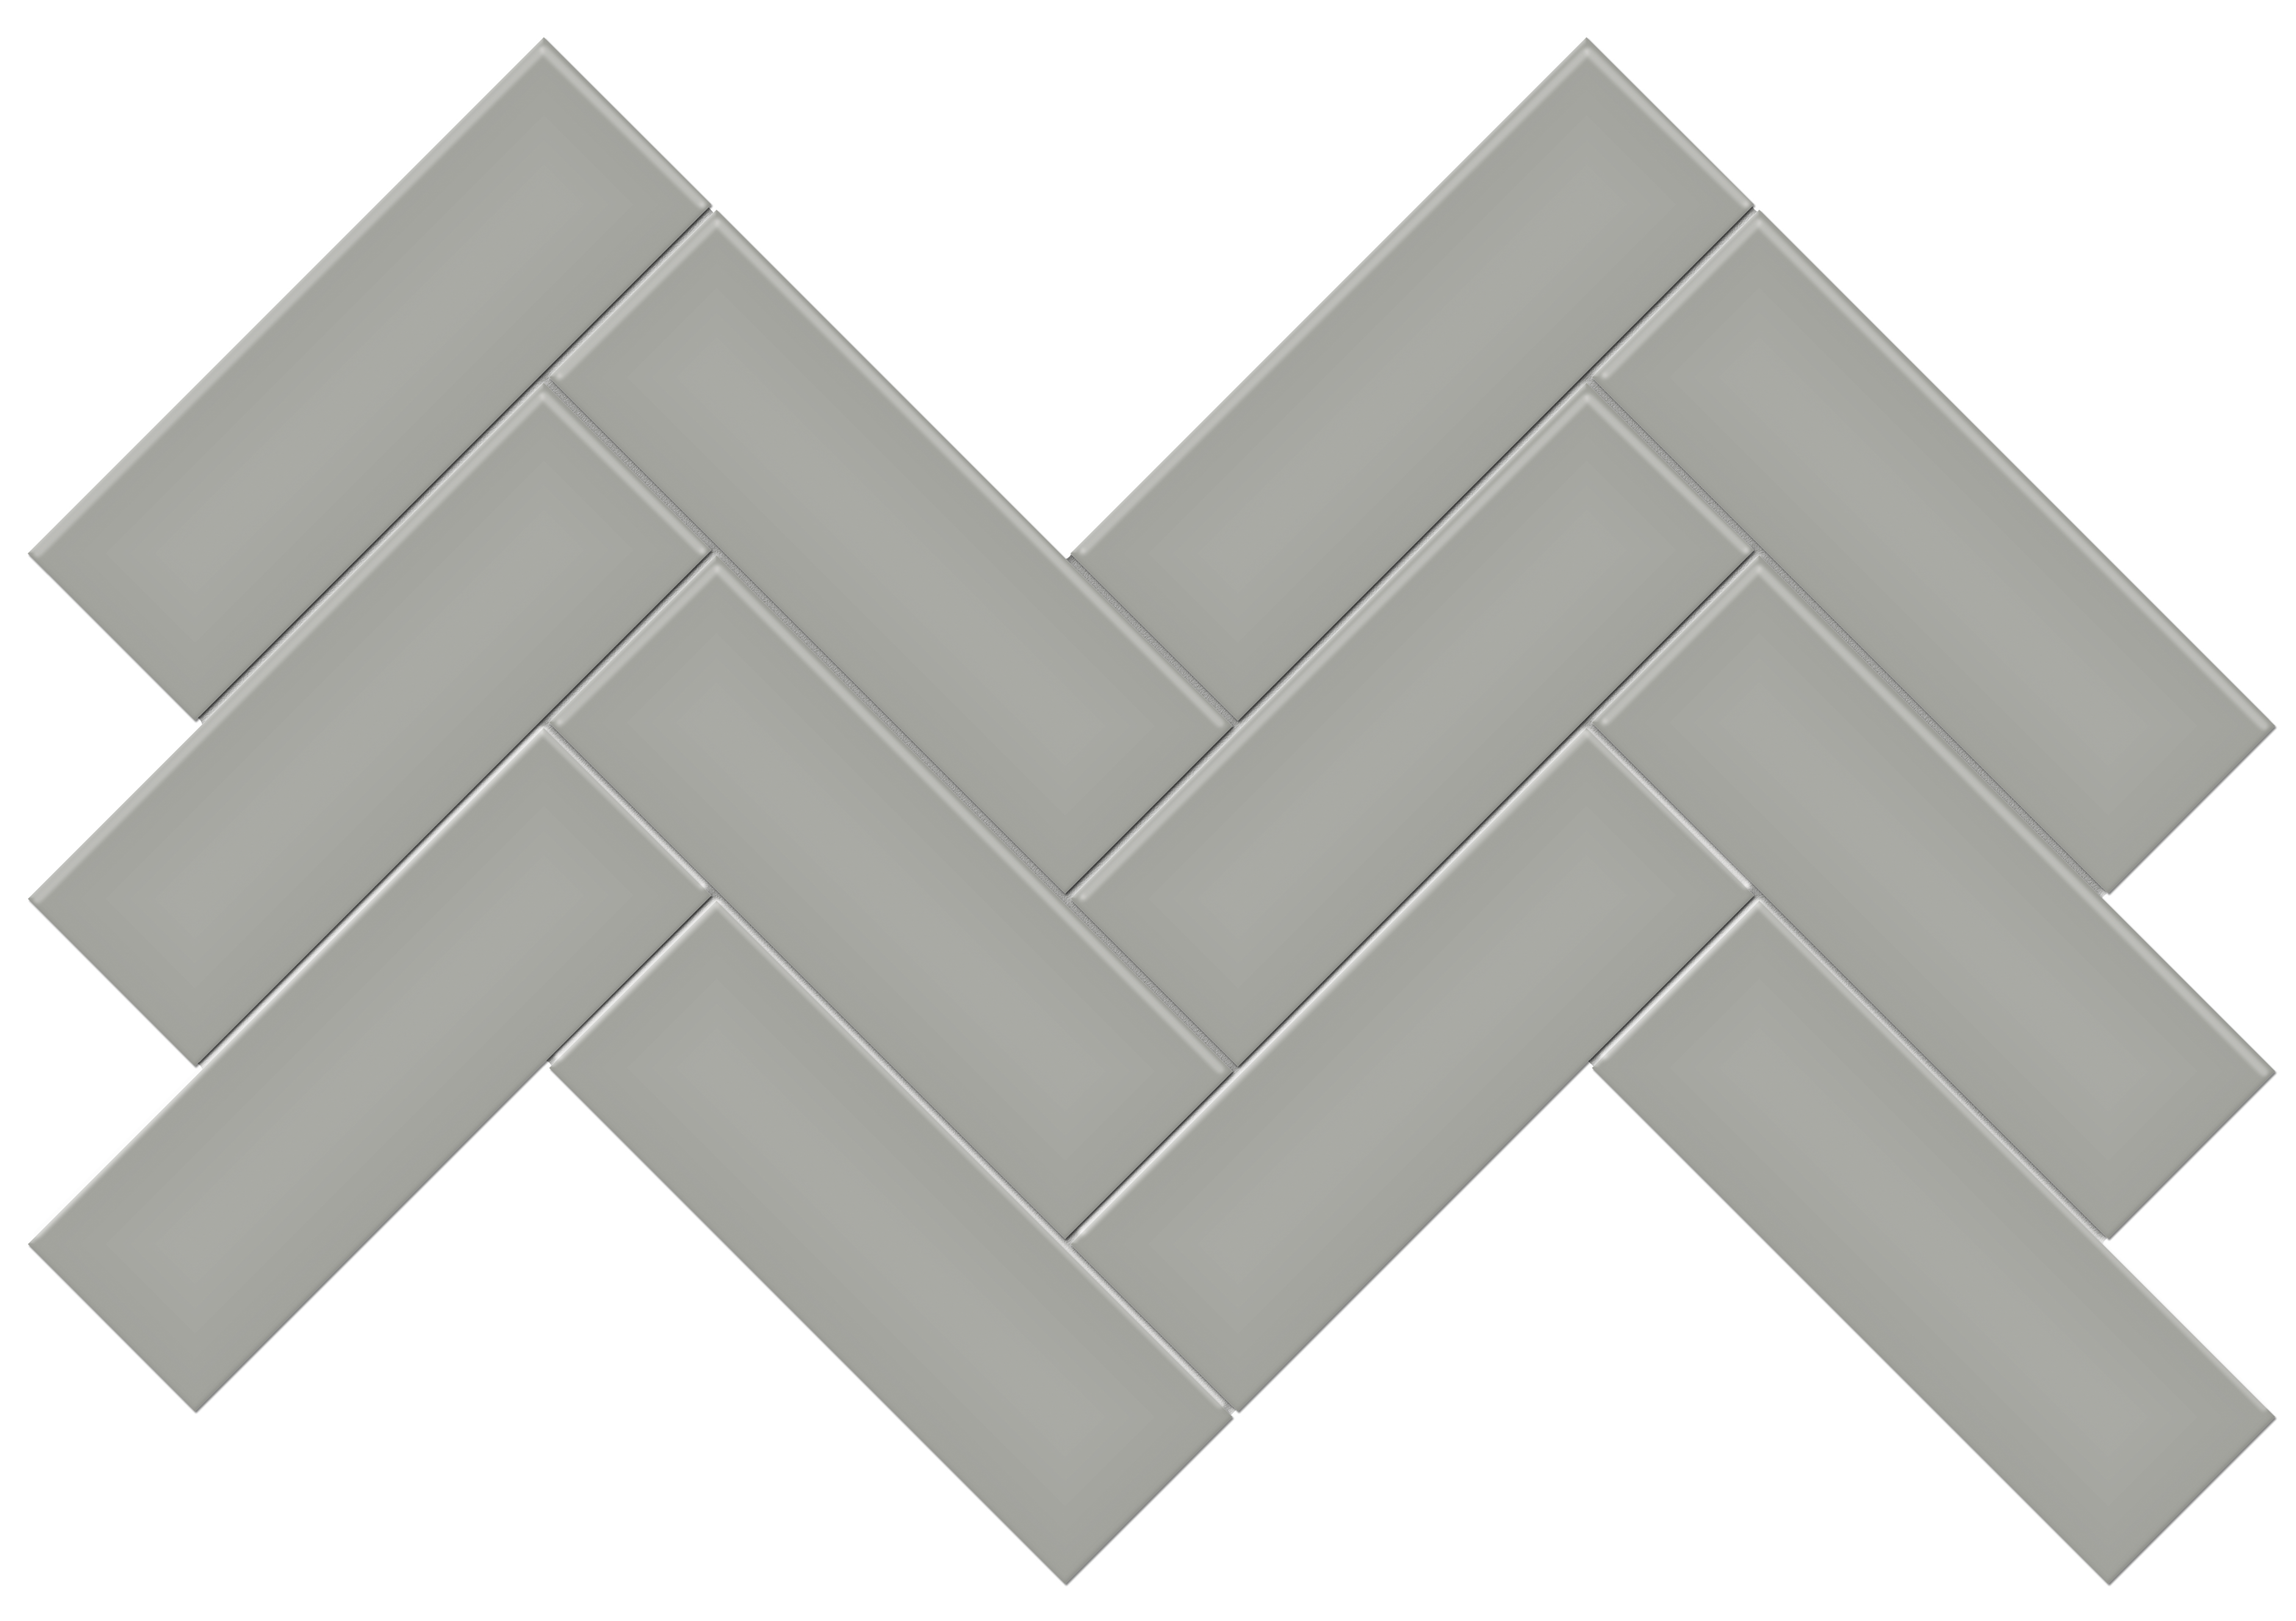 cement chic herringbone 2x6-inch pattern glazed porcelain mosaic from soho anatolia collection distributed by surface group international glossy finish pressed edge mesh shape